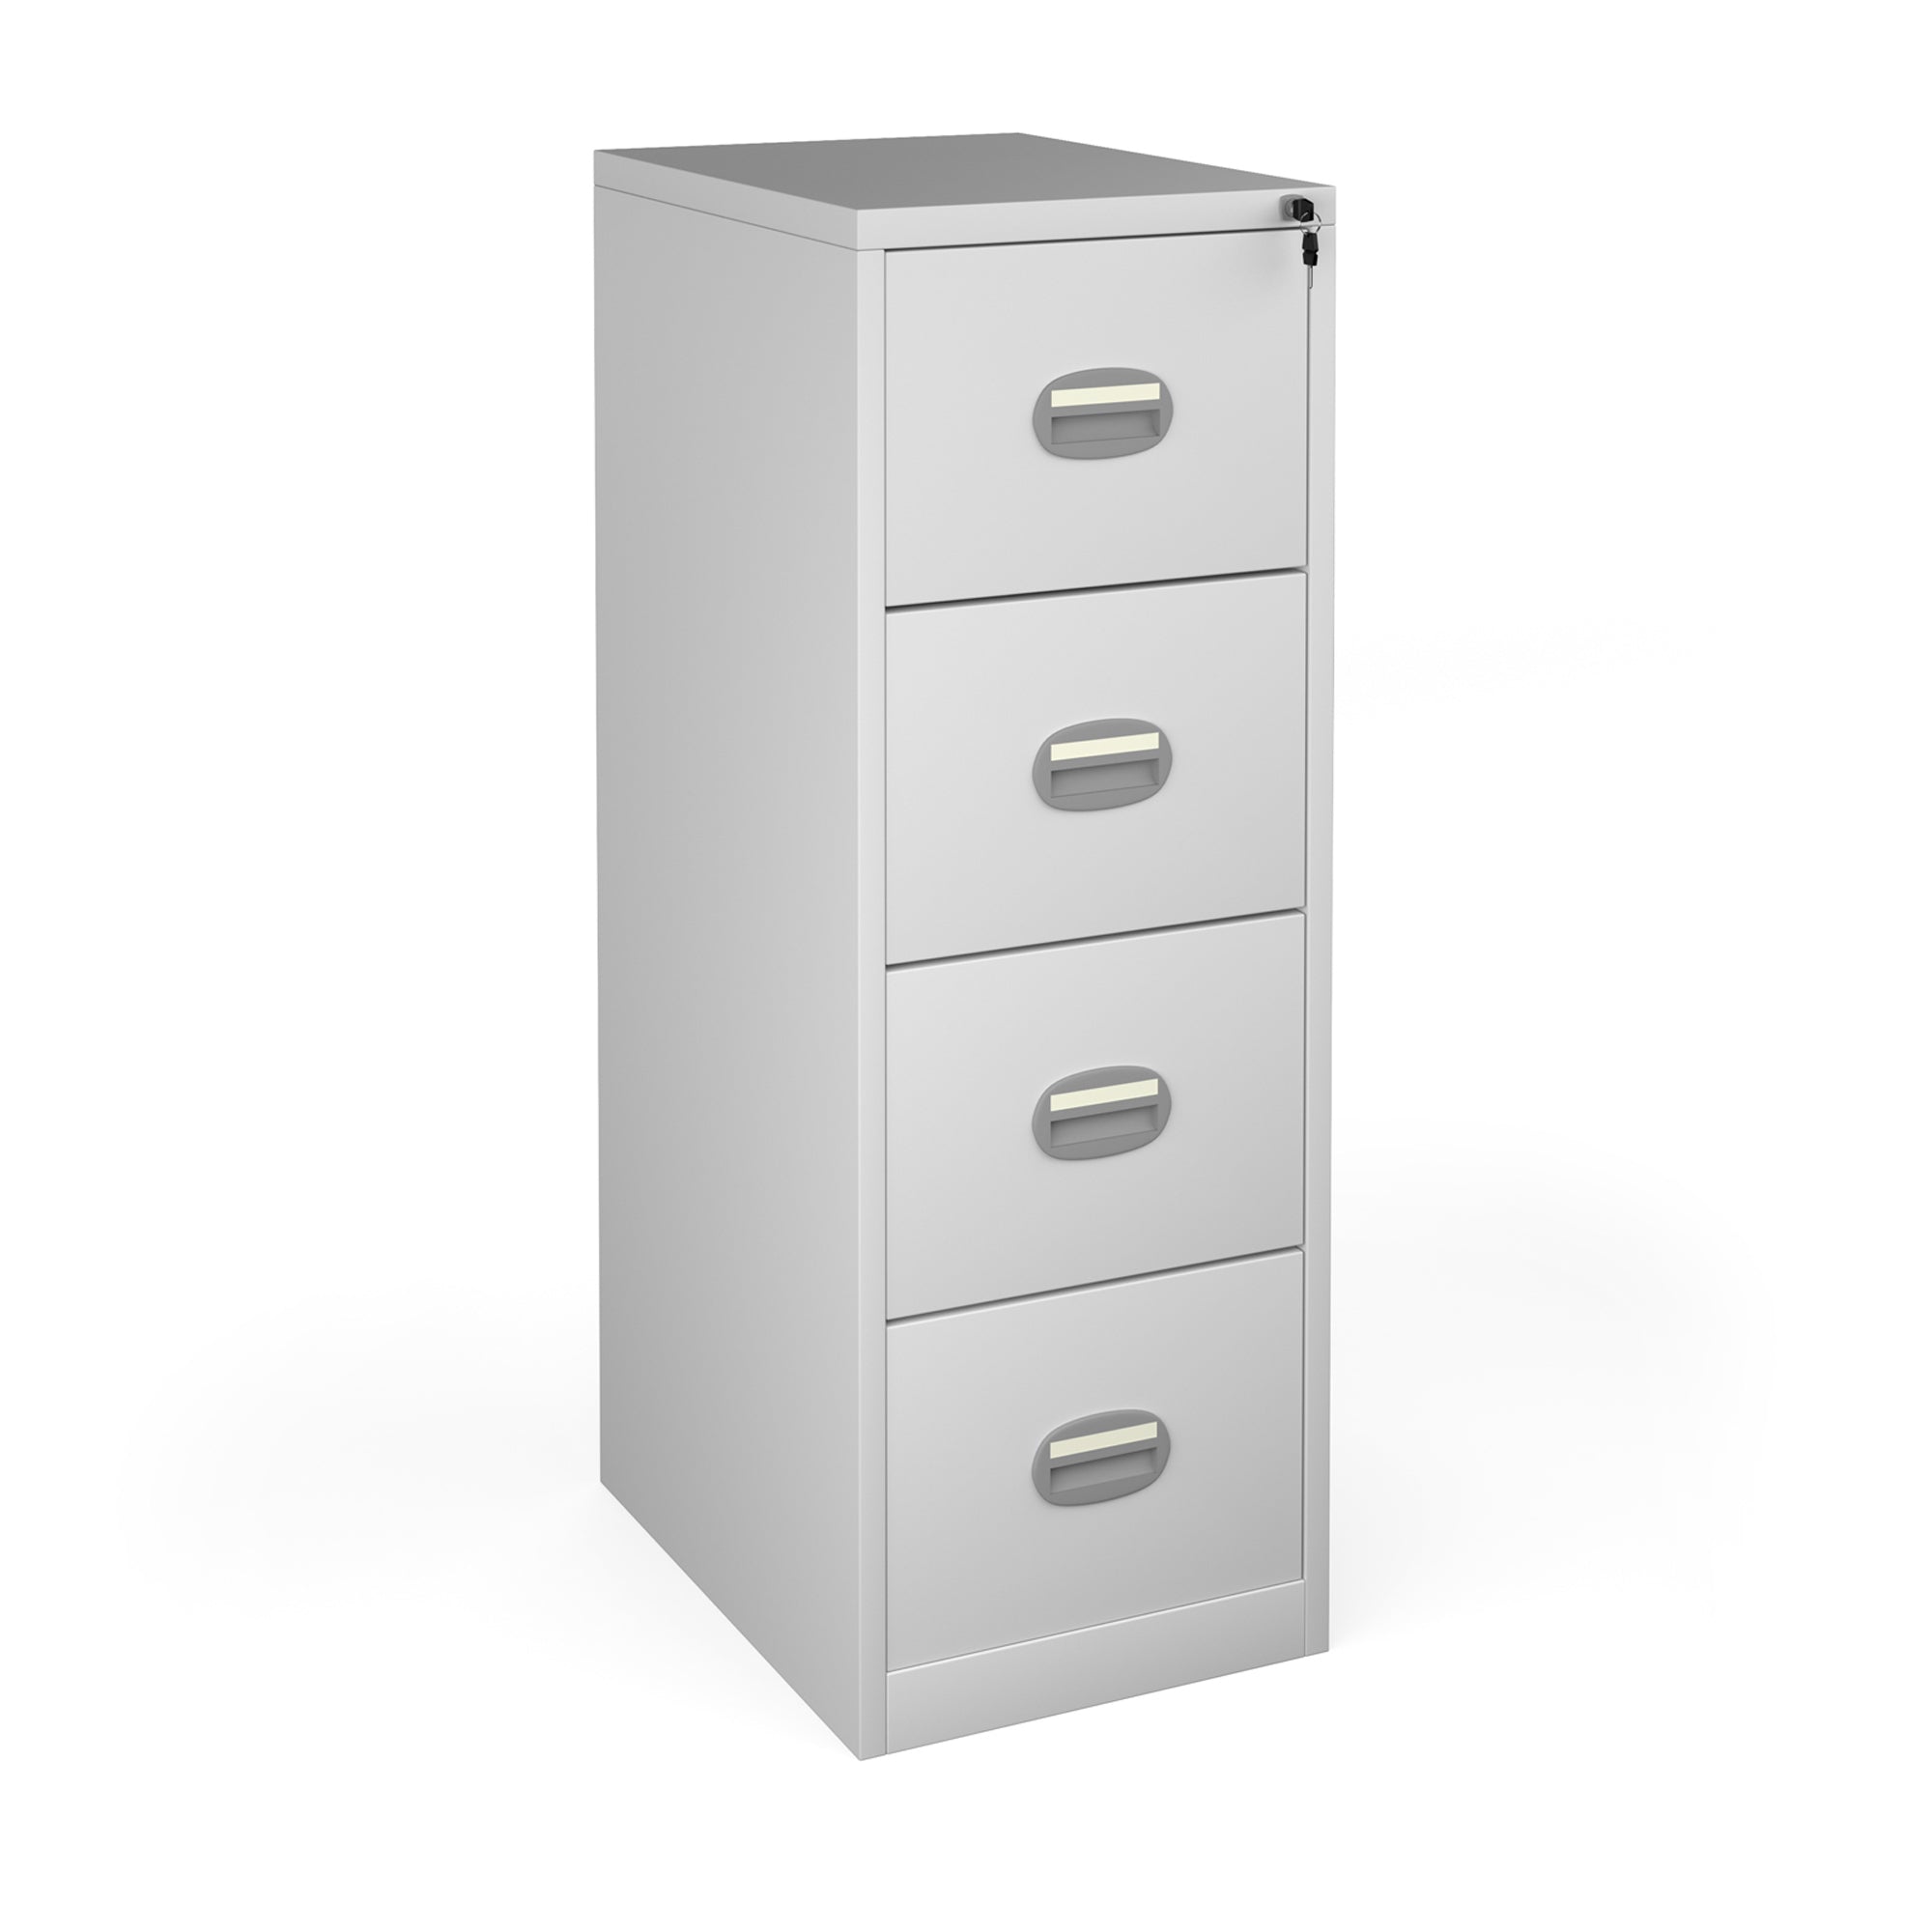 Steel 4 drawer contract filing cabinet 1320mm high - light grey - Office Products Online